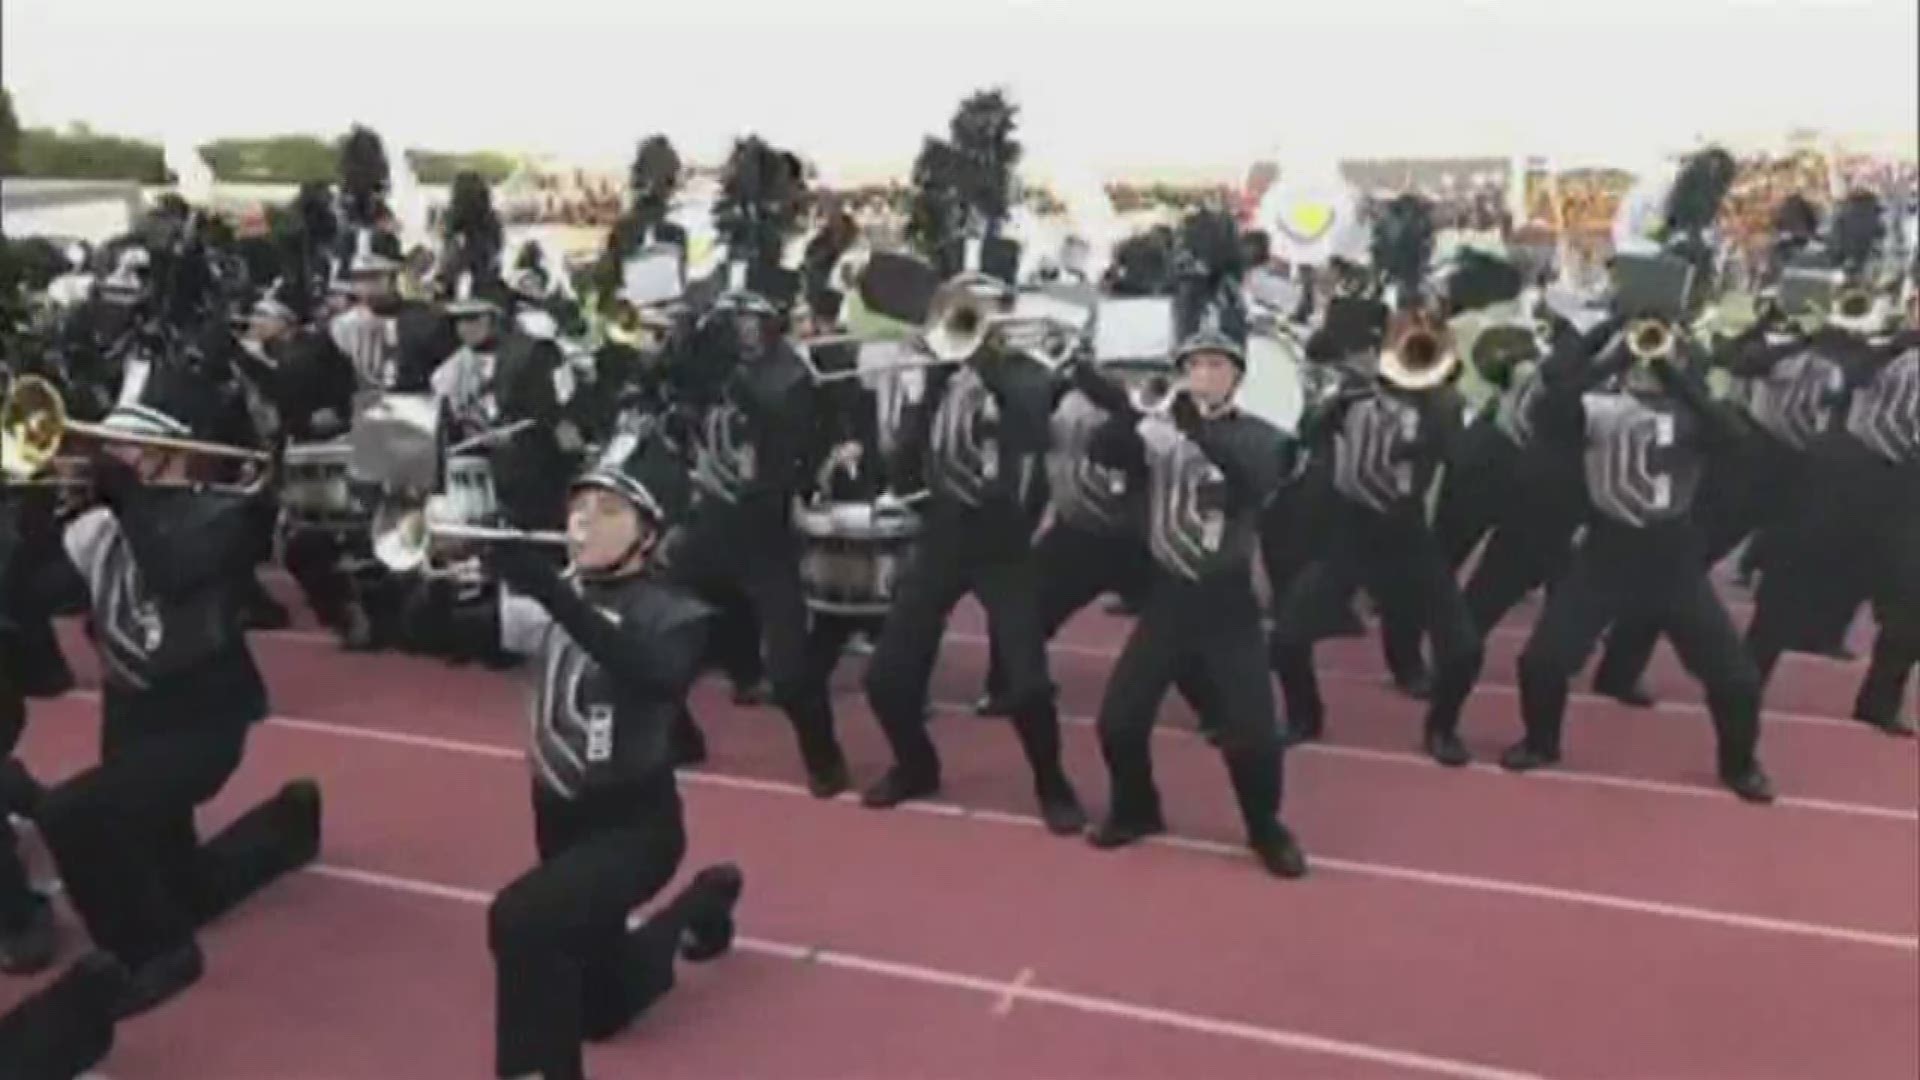 If you have a kid in marching band, changes are on the way. The UIL will now require physical exams or medical histories to make sure students are healthy enough to participate, especially in the heat.